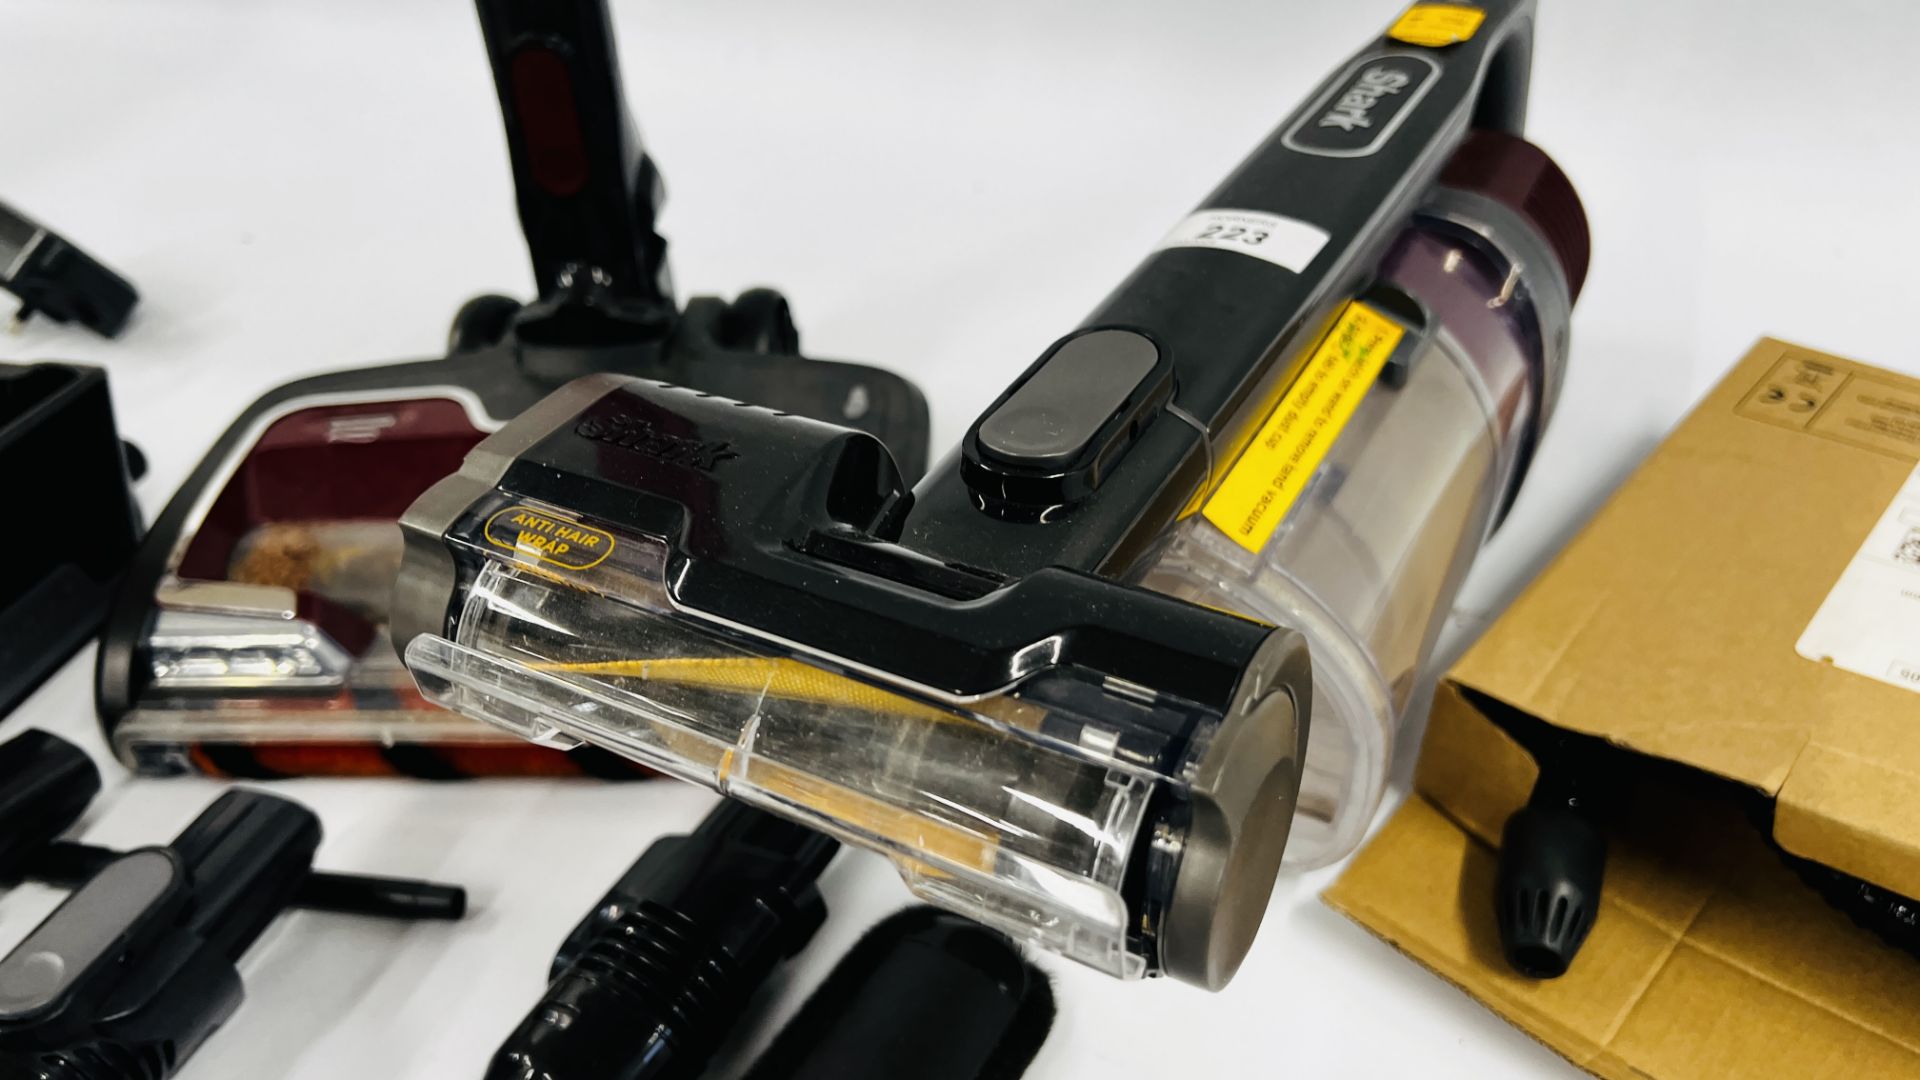 SHARK DUO CLEAN CORDLESS VACUUM CLEANER WITH CHARGER, BATTERIES & ACCESSORIES - SOLD AS SEEN. - Image 6 of 8